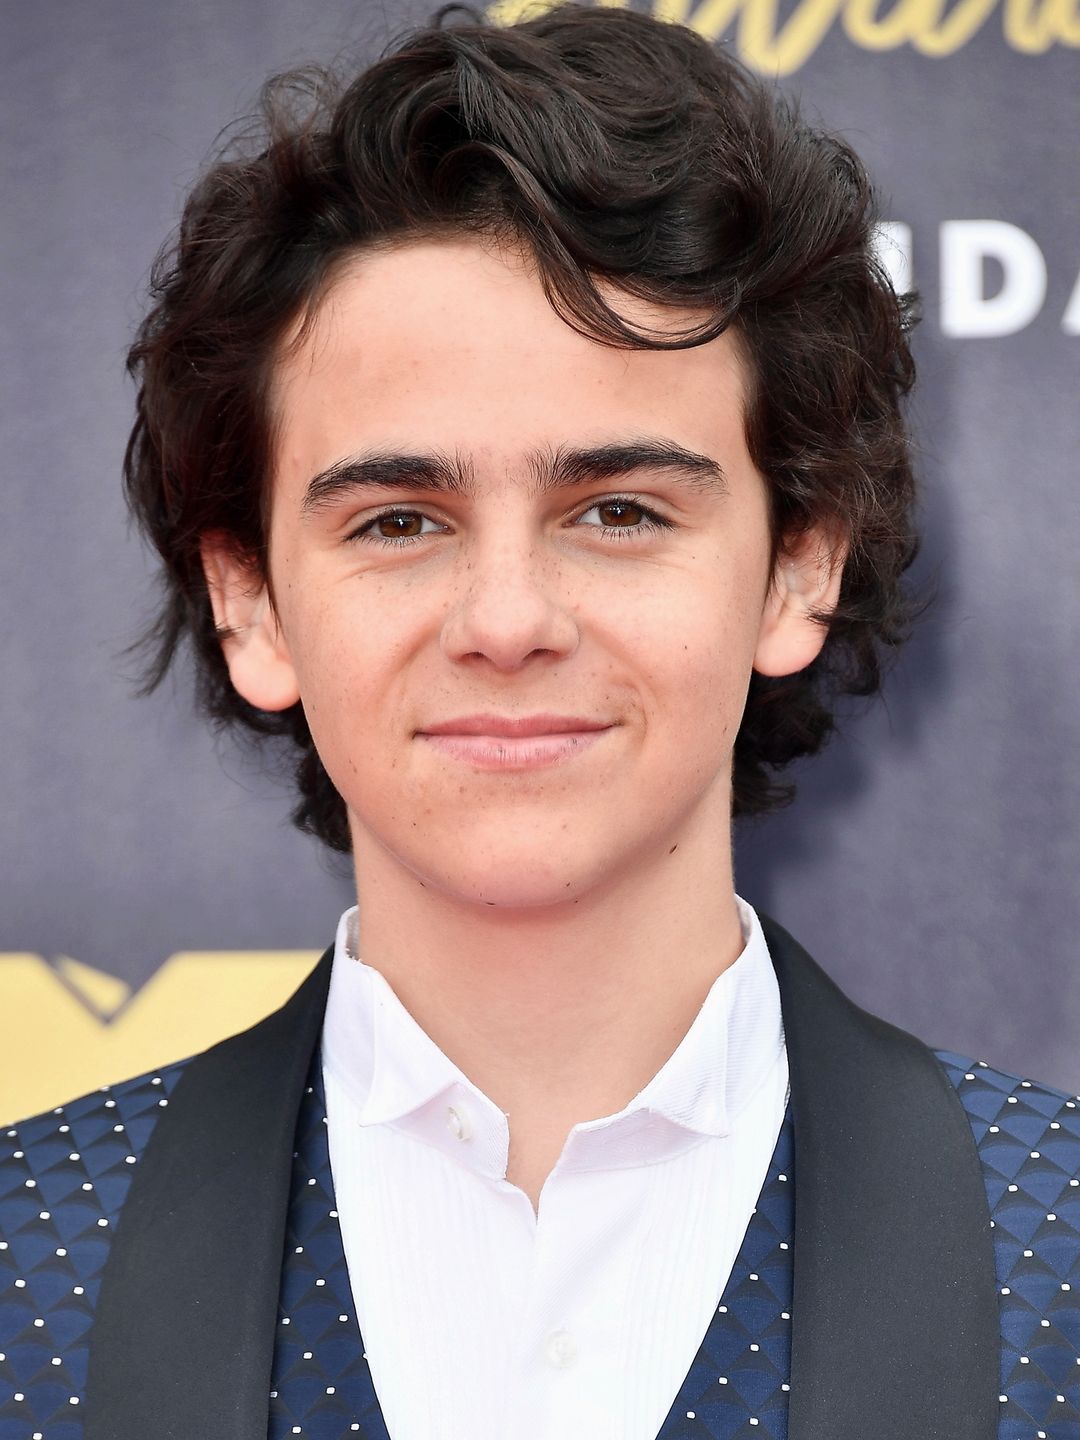 Jack Grazer in his youth